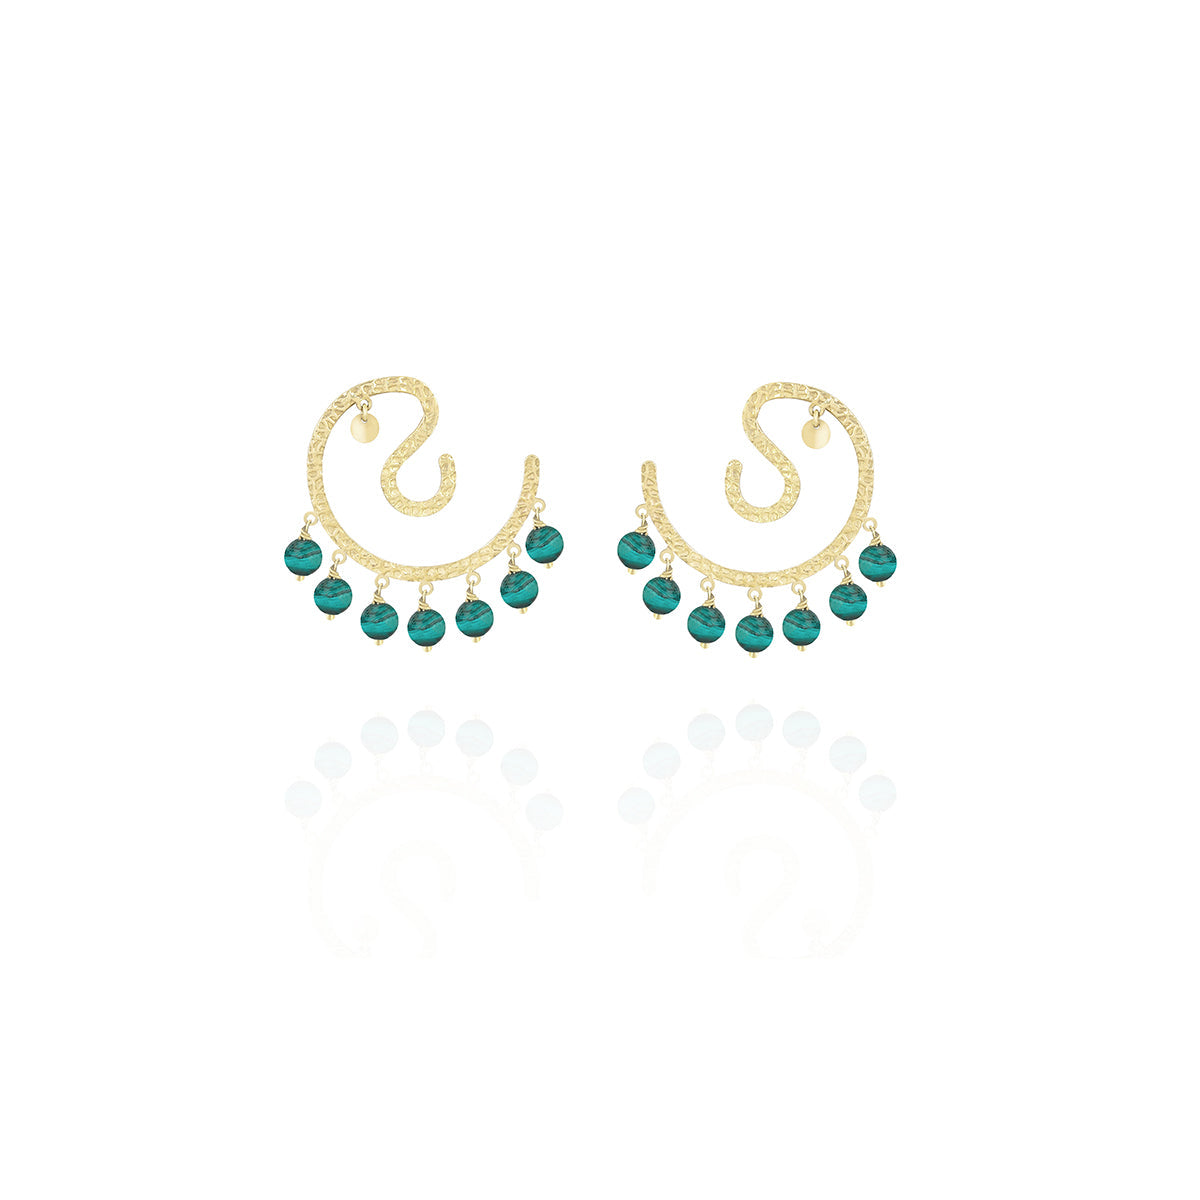 Hoop Earrings With Charms in 18k Yellow gold